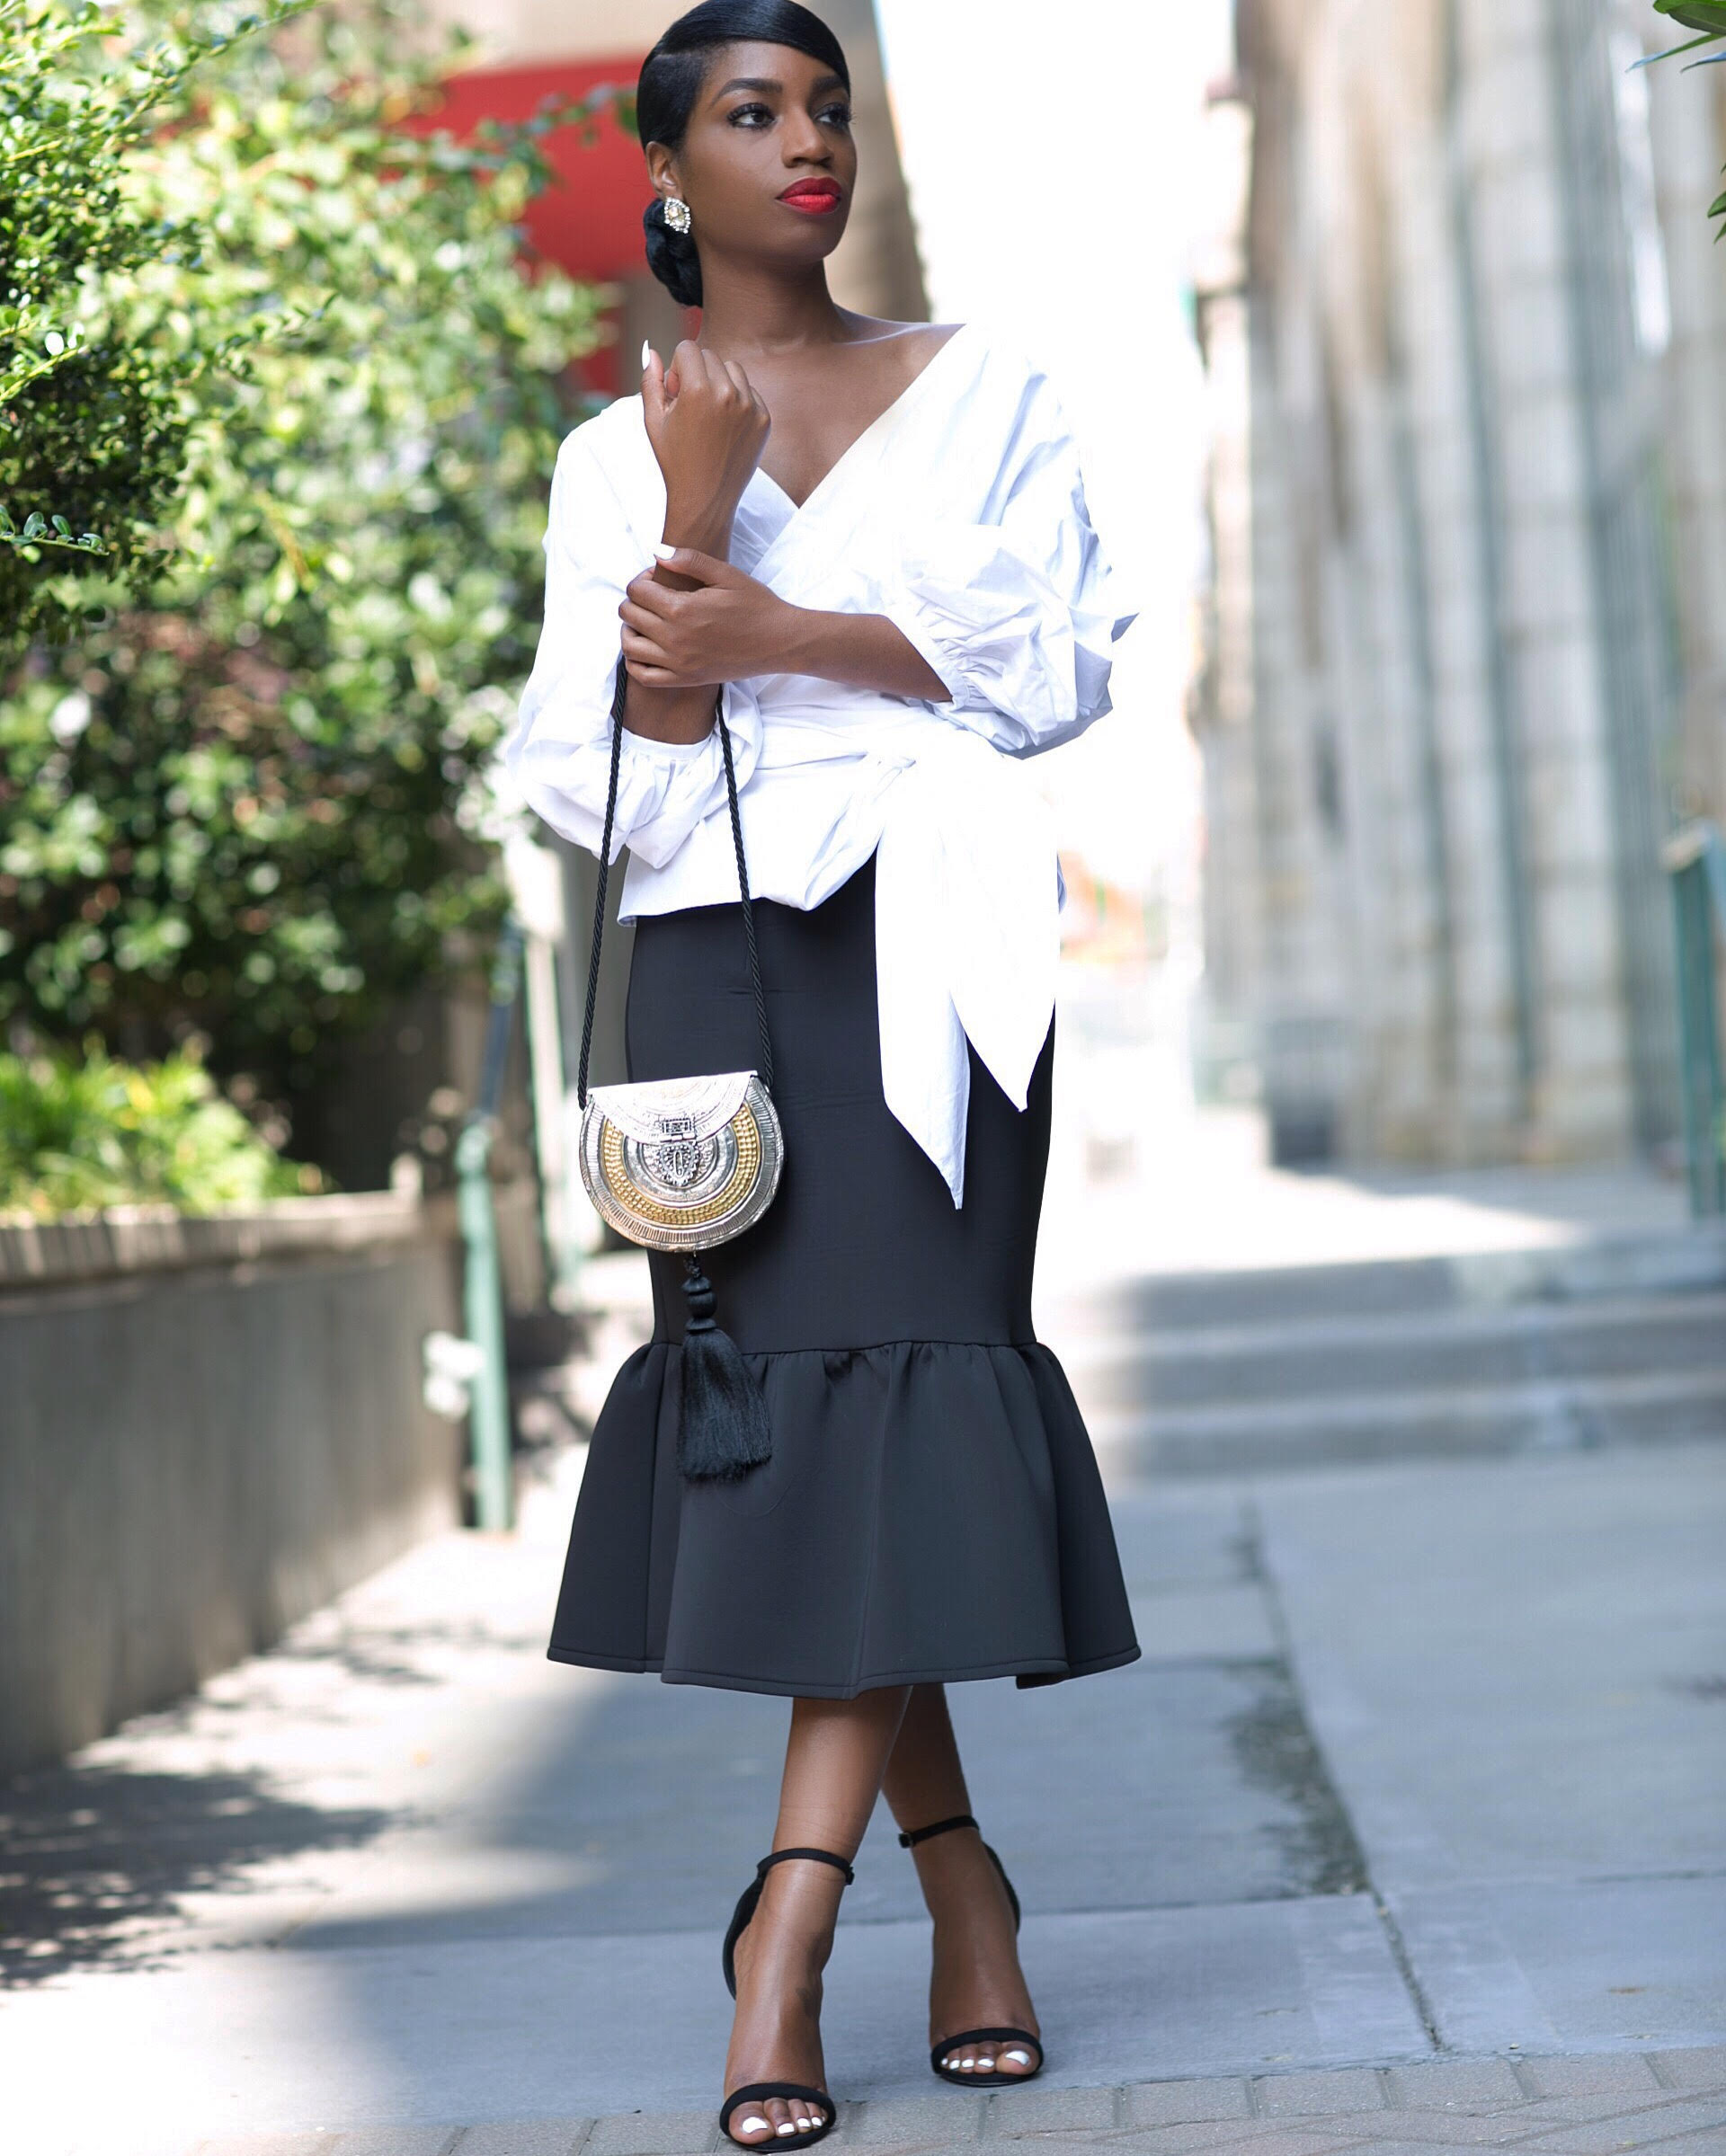 Fashion Bombshell of the Day: Ren from NYC – Fashion Bomb Daily